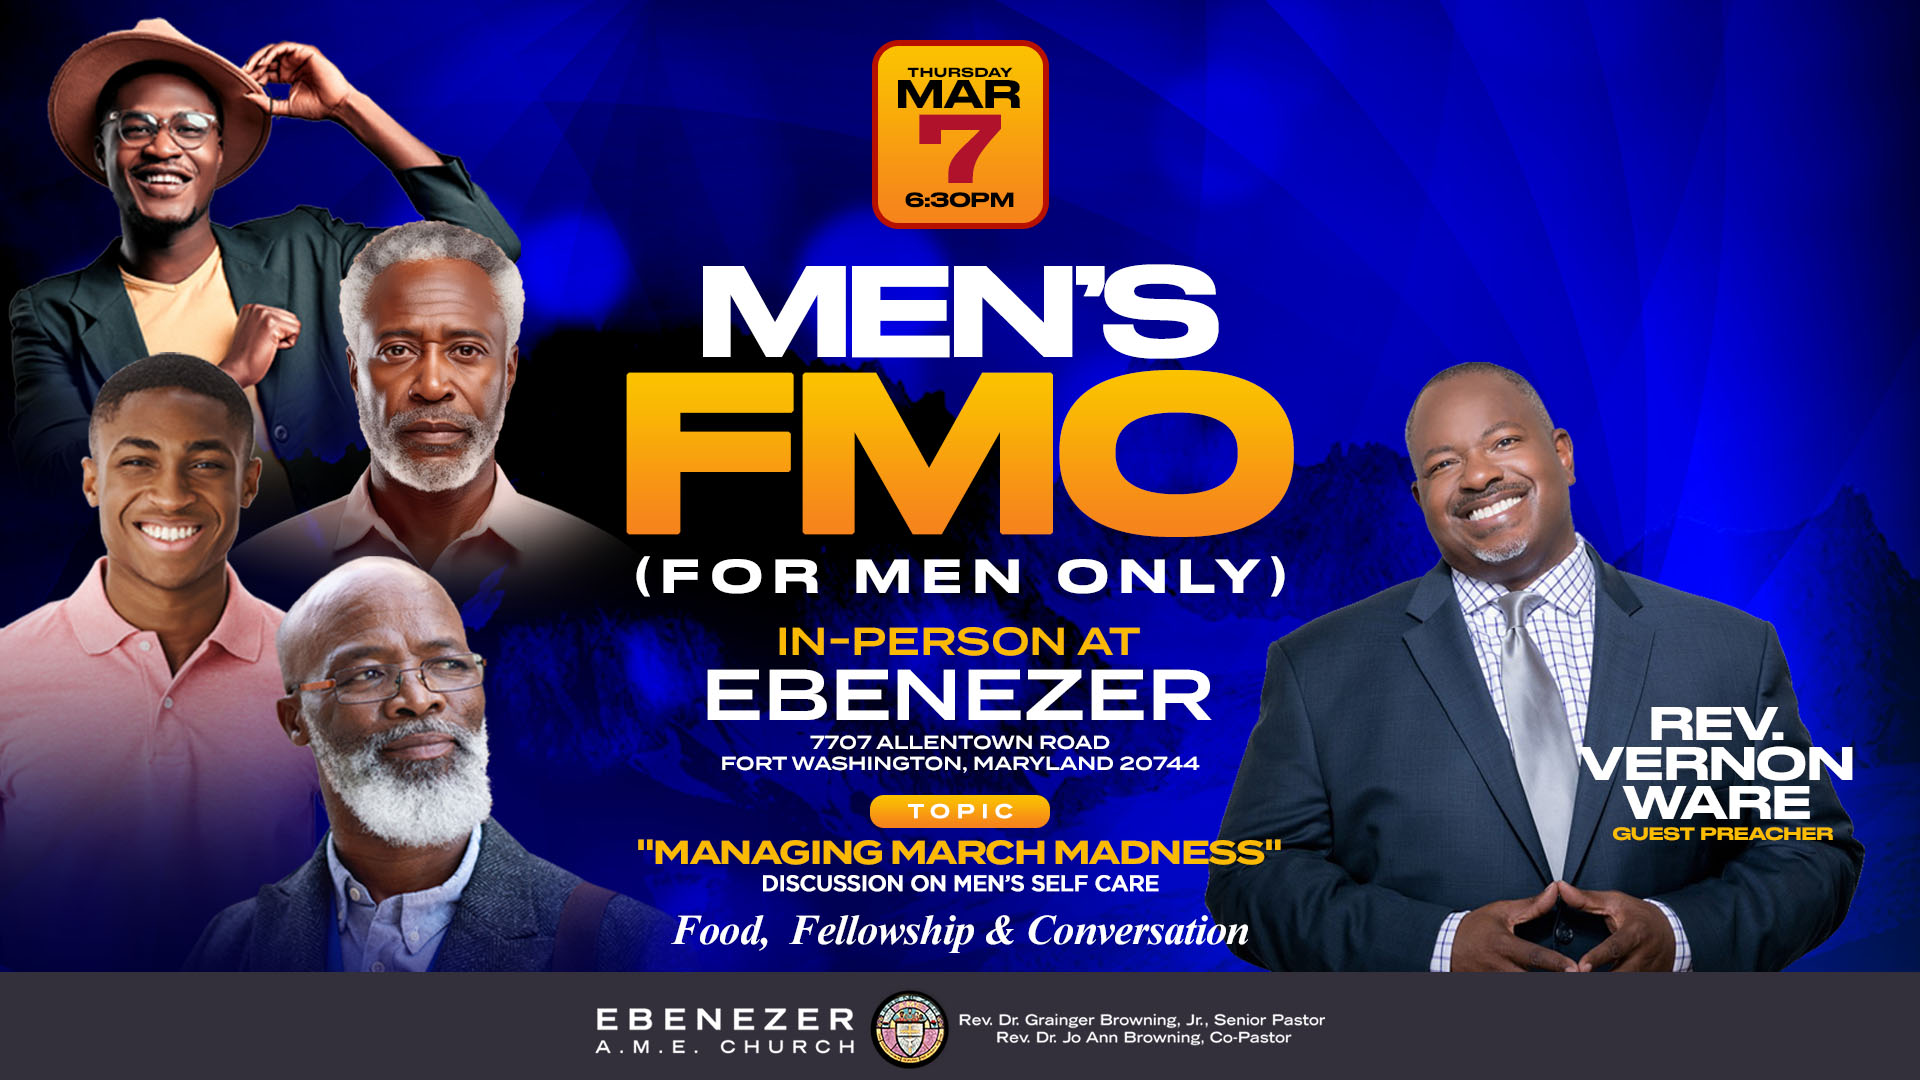 Men's FMO on March 7 with Rev. Vernon Ware